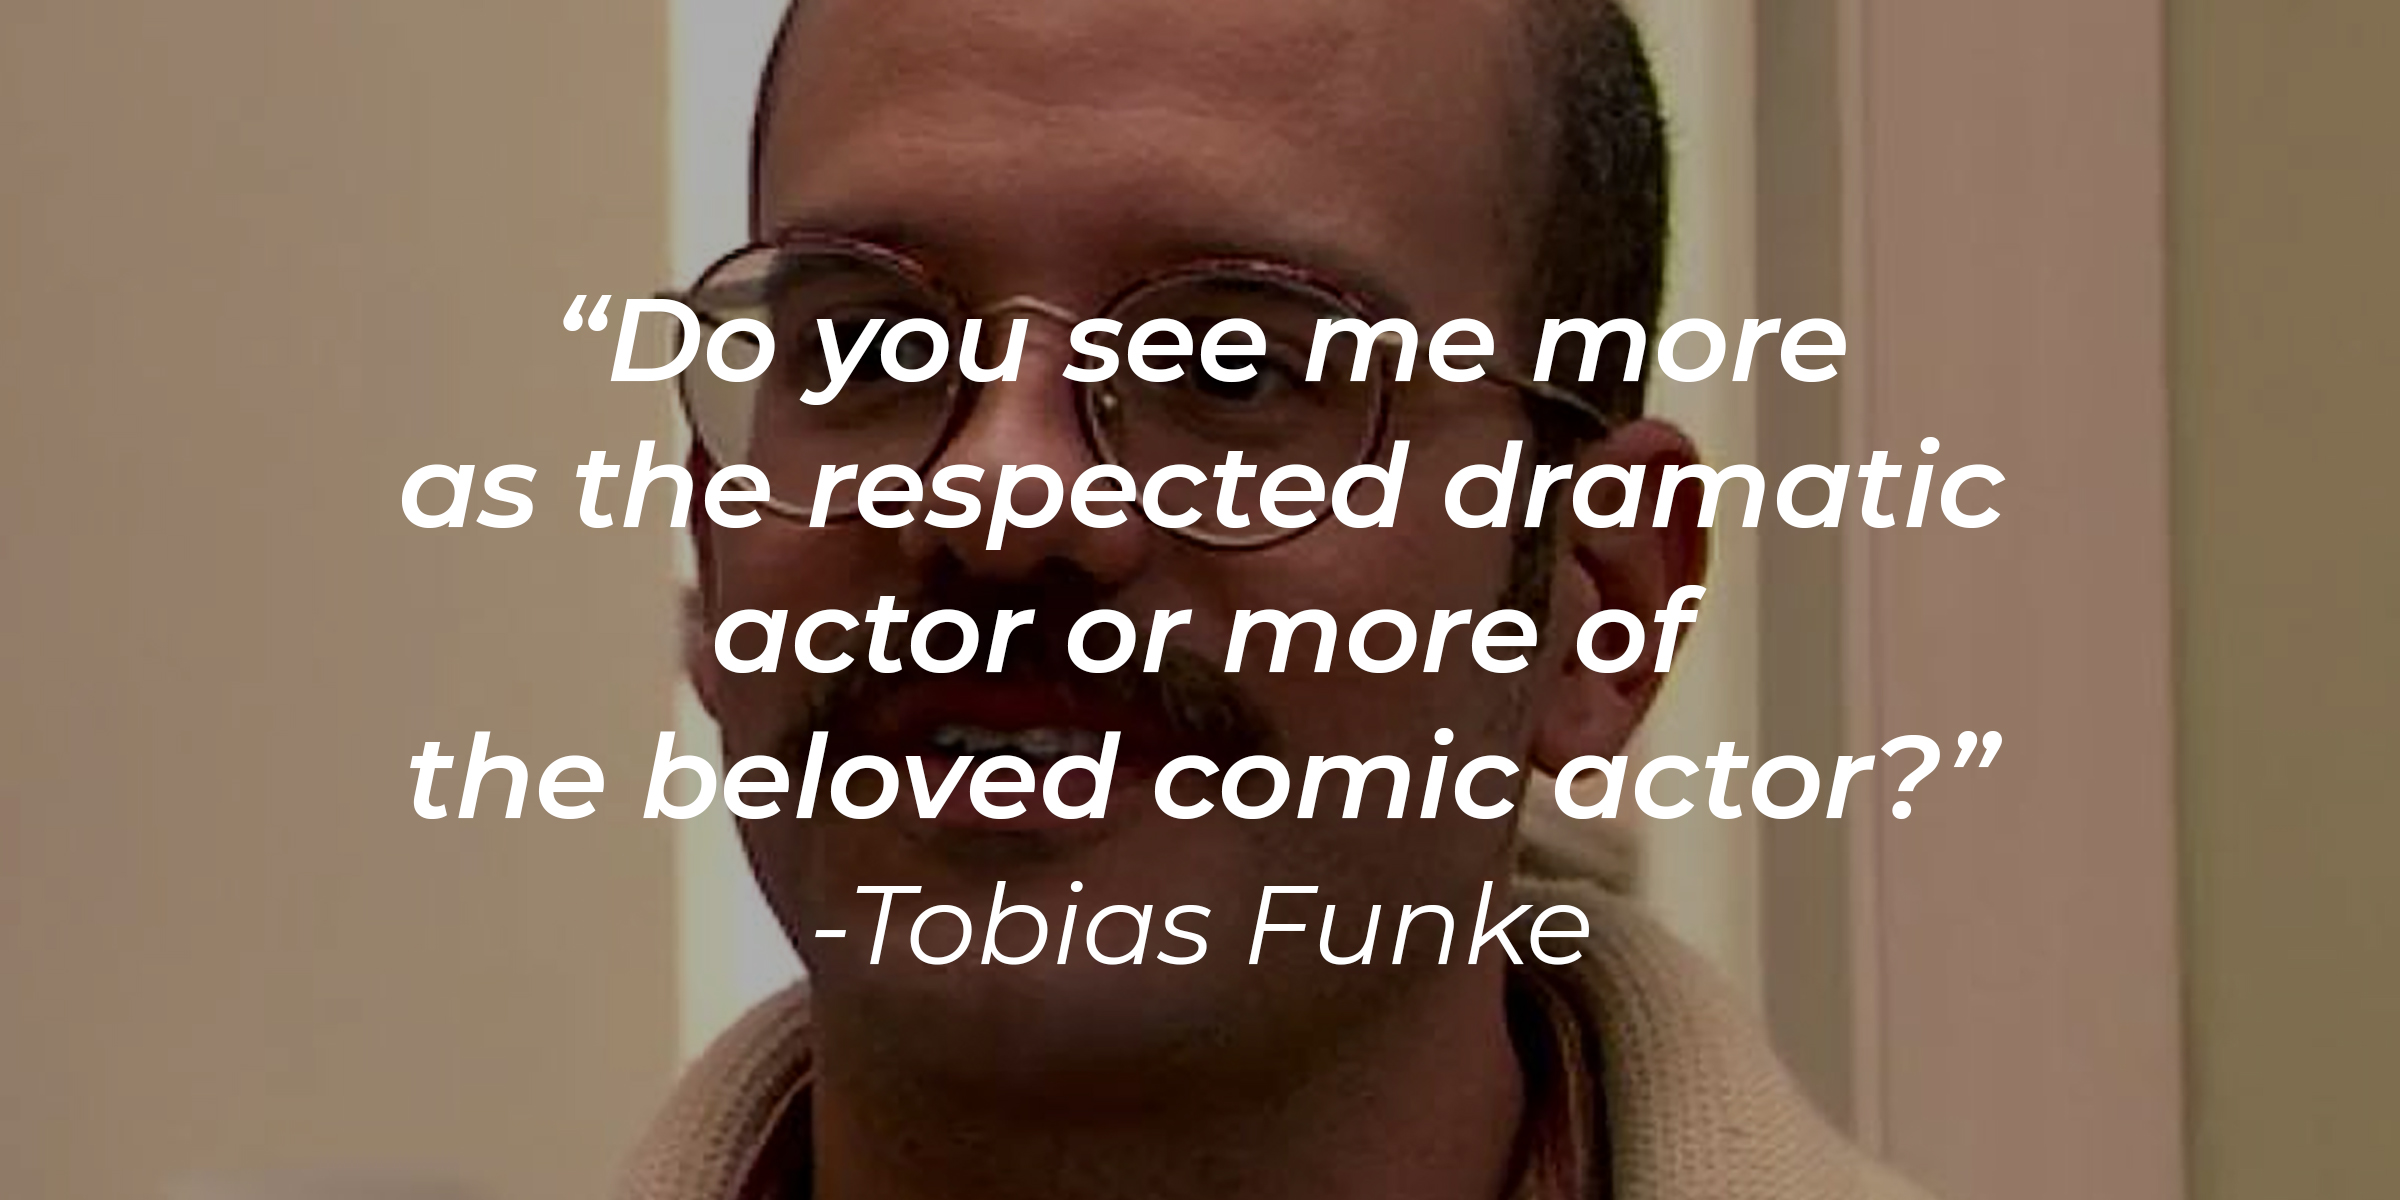 A photo of Tobias Funke with his quote: "Do you see me more as the respected dramatic actor or more of the beloved comic actor?" | Source: Facebook.com/ArrestedDevelopment